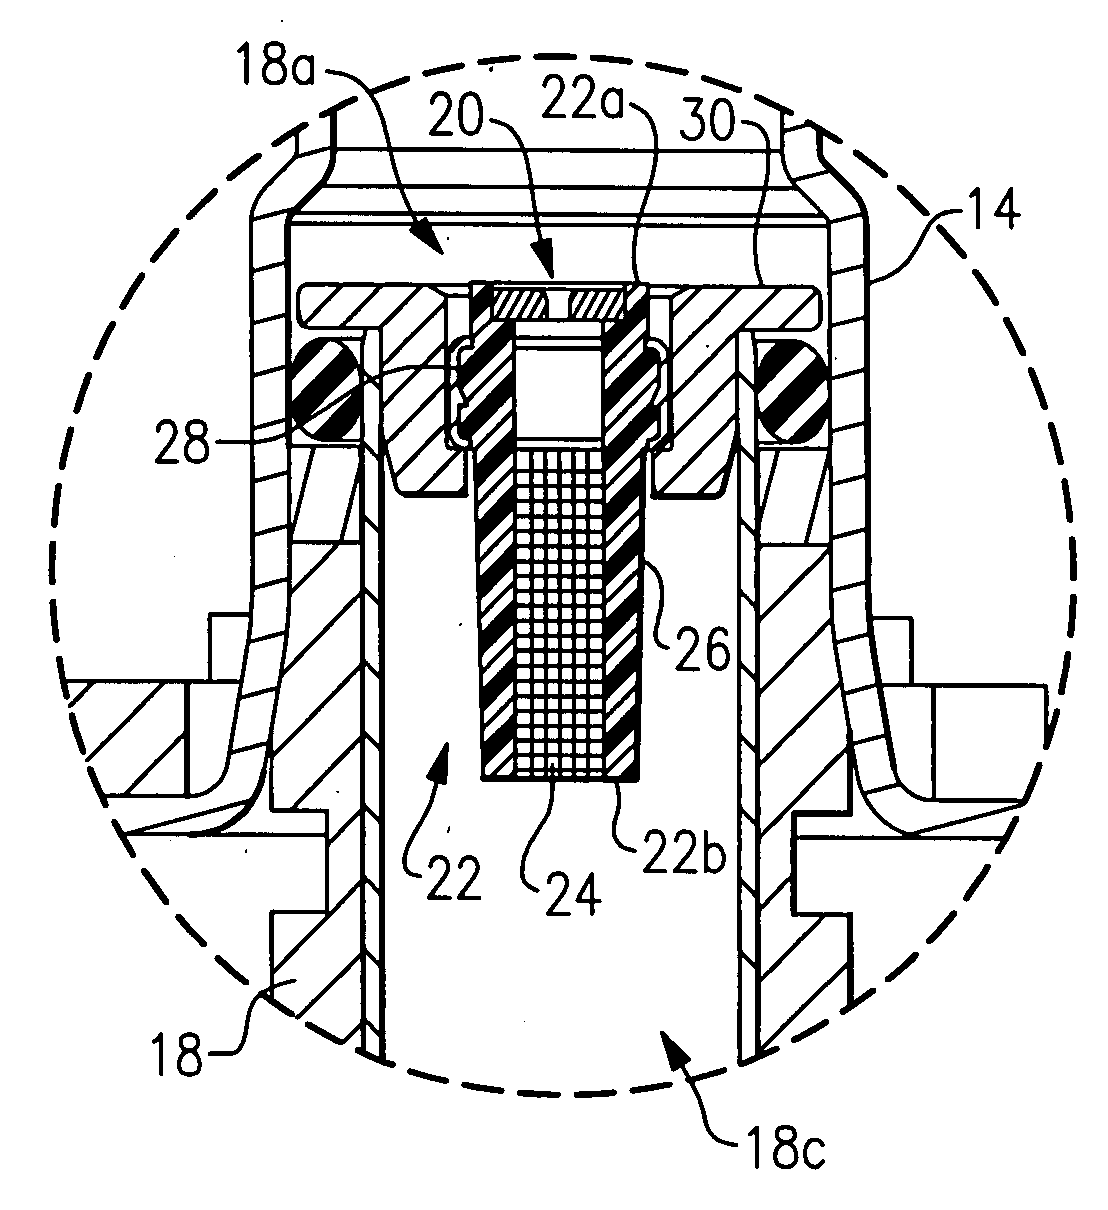 Injector fuel filter with built-in orifice for flow restriction